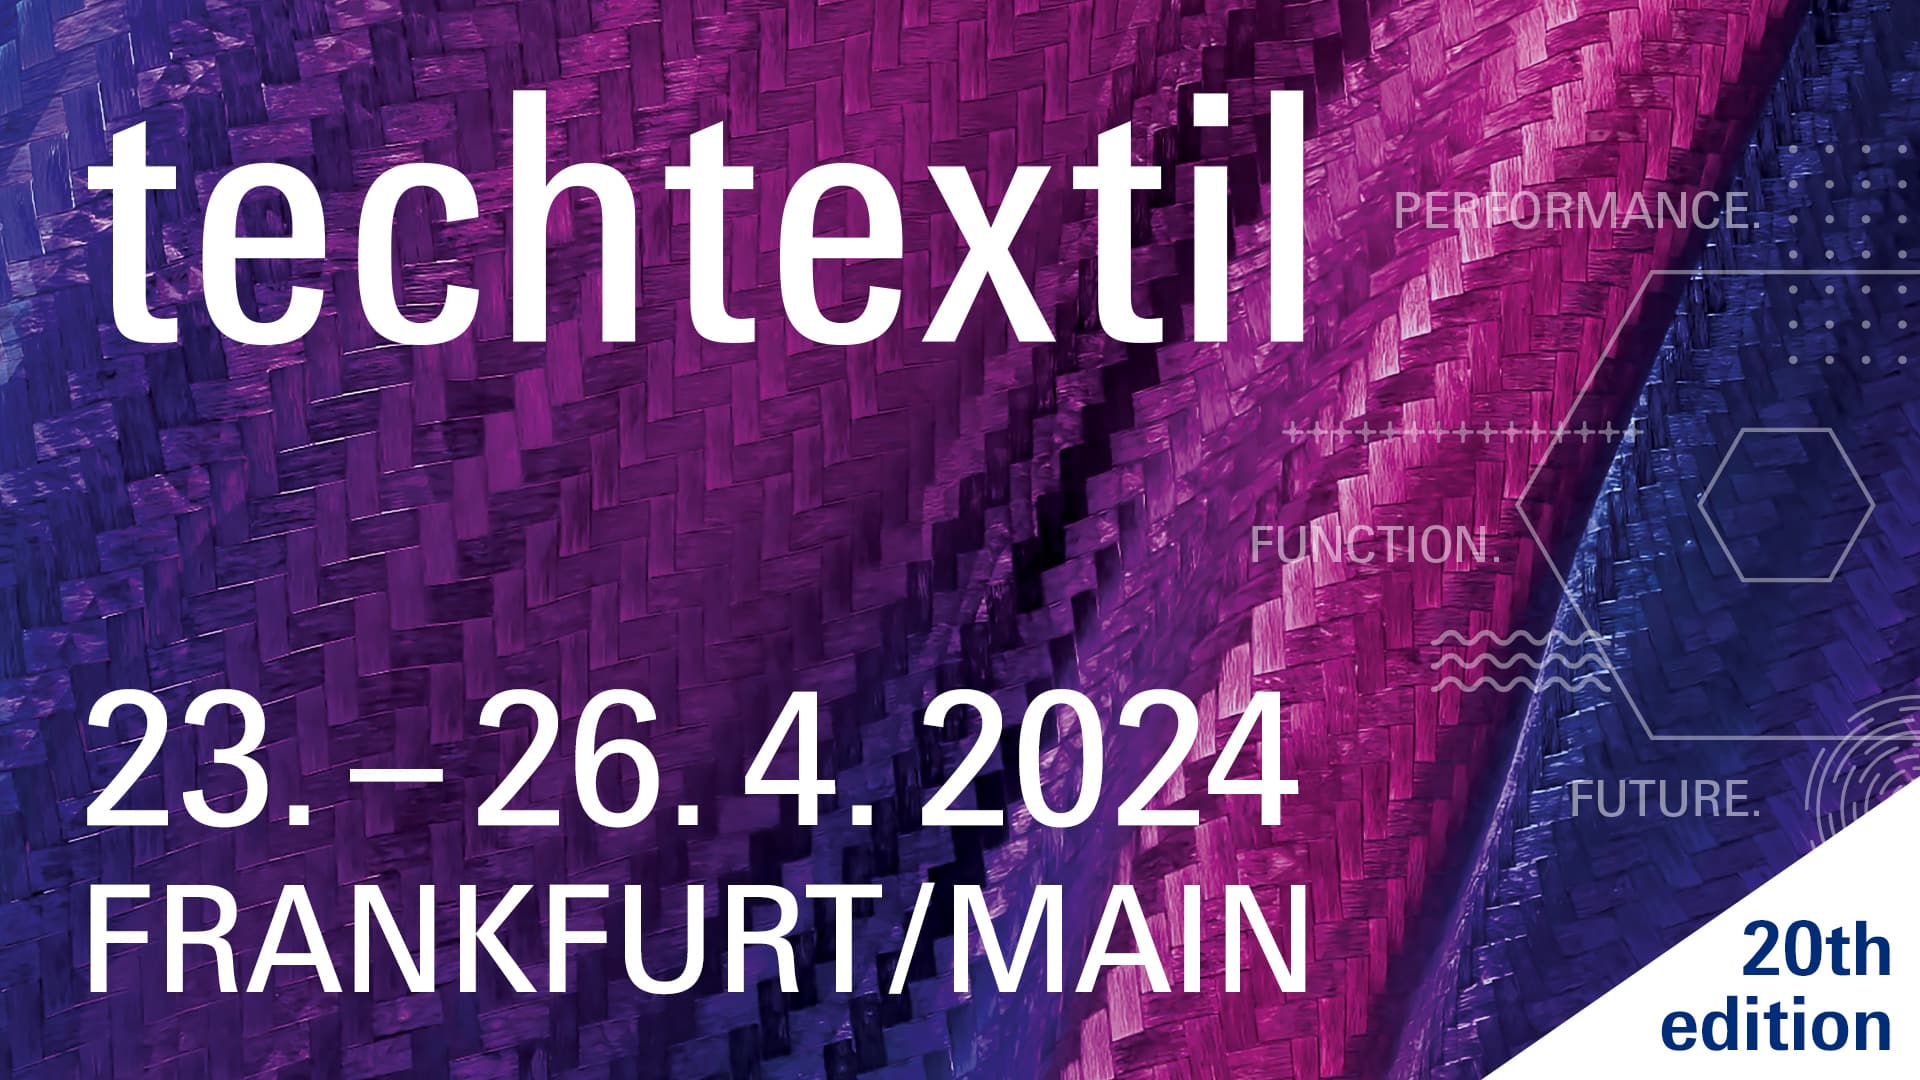 an imaging showing the dates and location of the 2024 techtextil exhibition